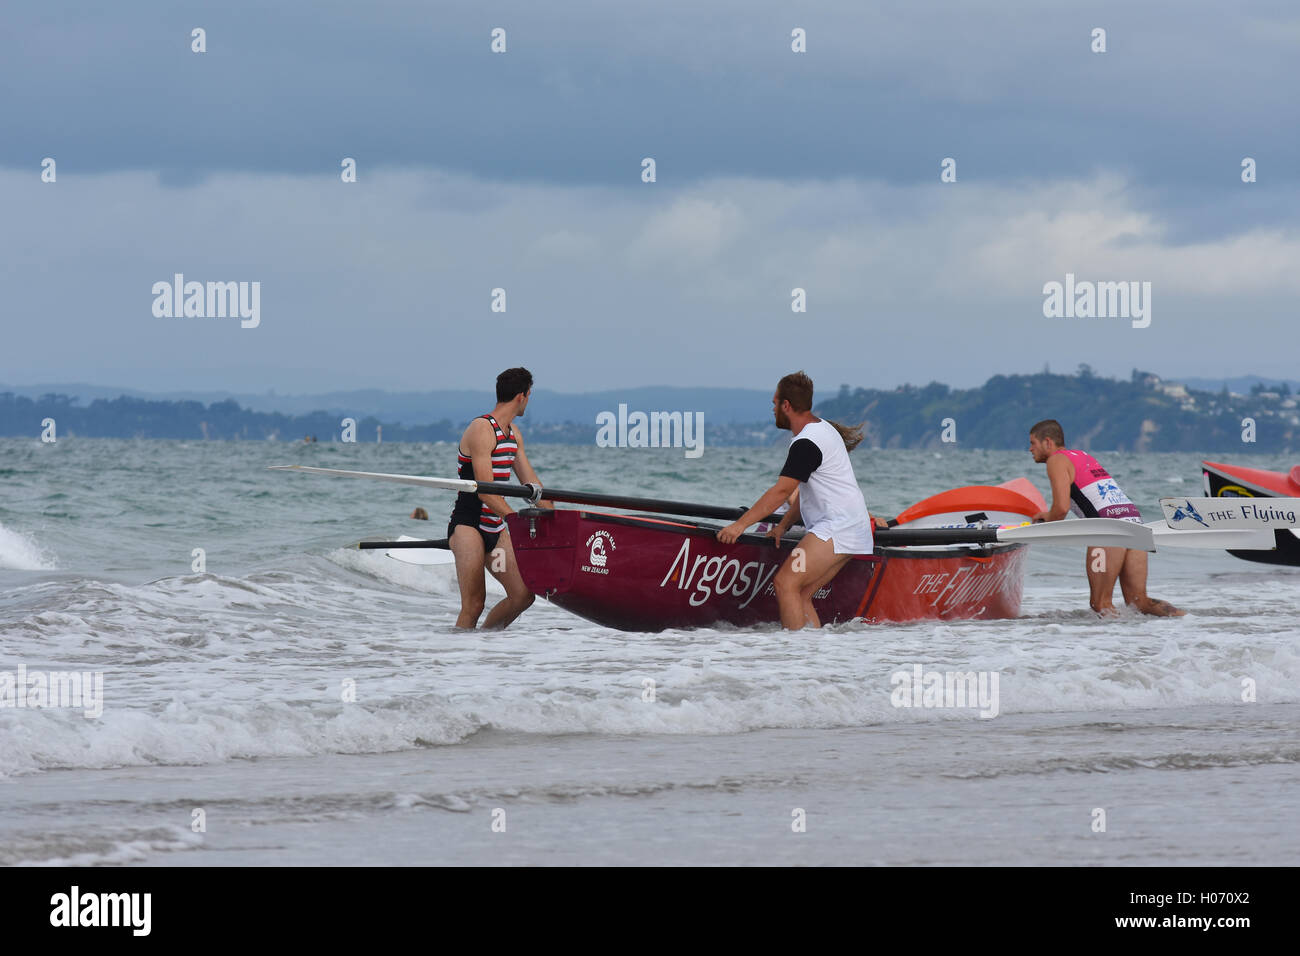 Surf Boat Rowing Stock Photos &amp; Surf Boat Rowing Stock ...